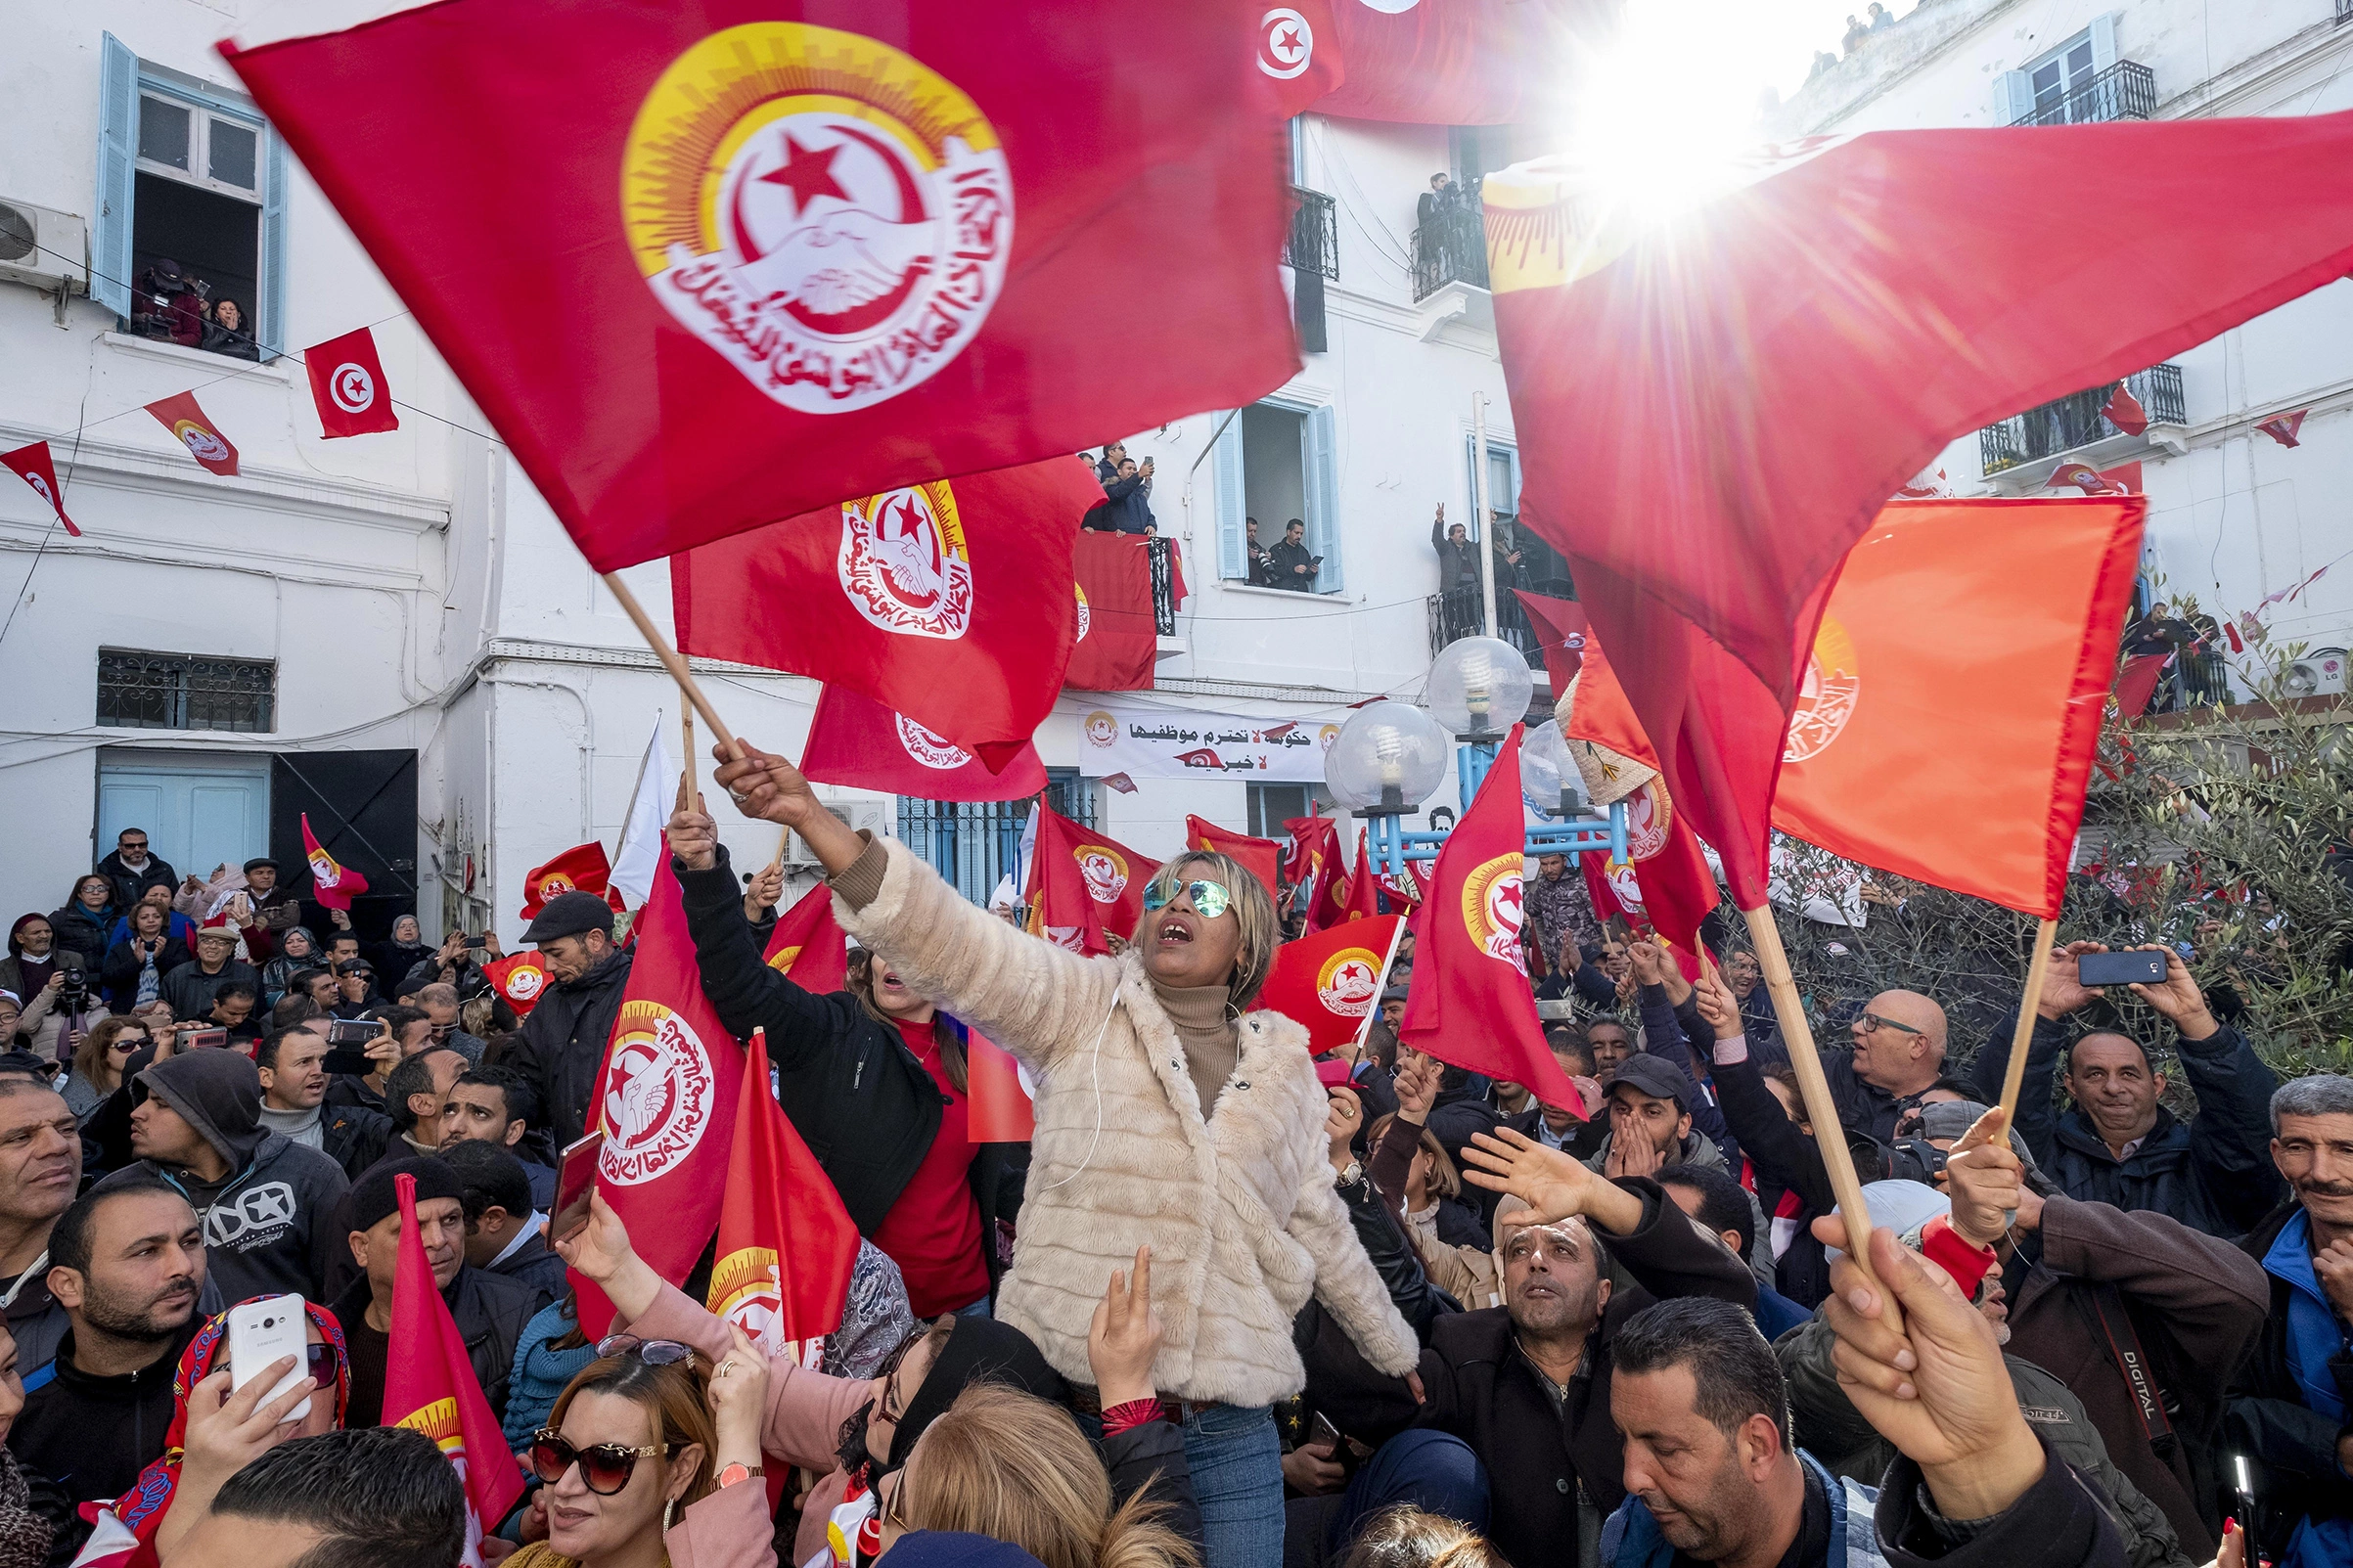 Tunisia: Social tension mounting, difficult-to-overcome multidimensional crisis looming